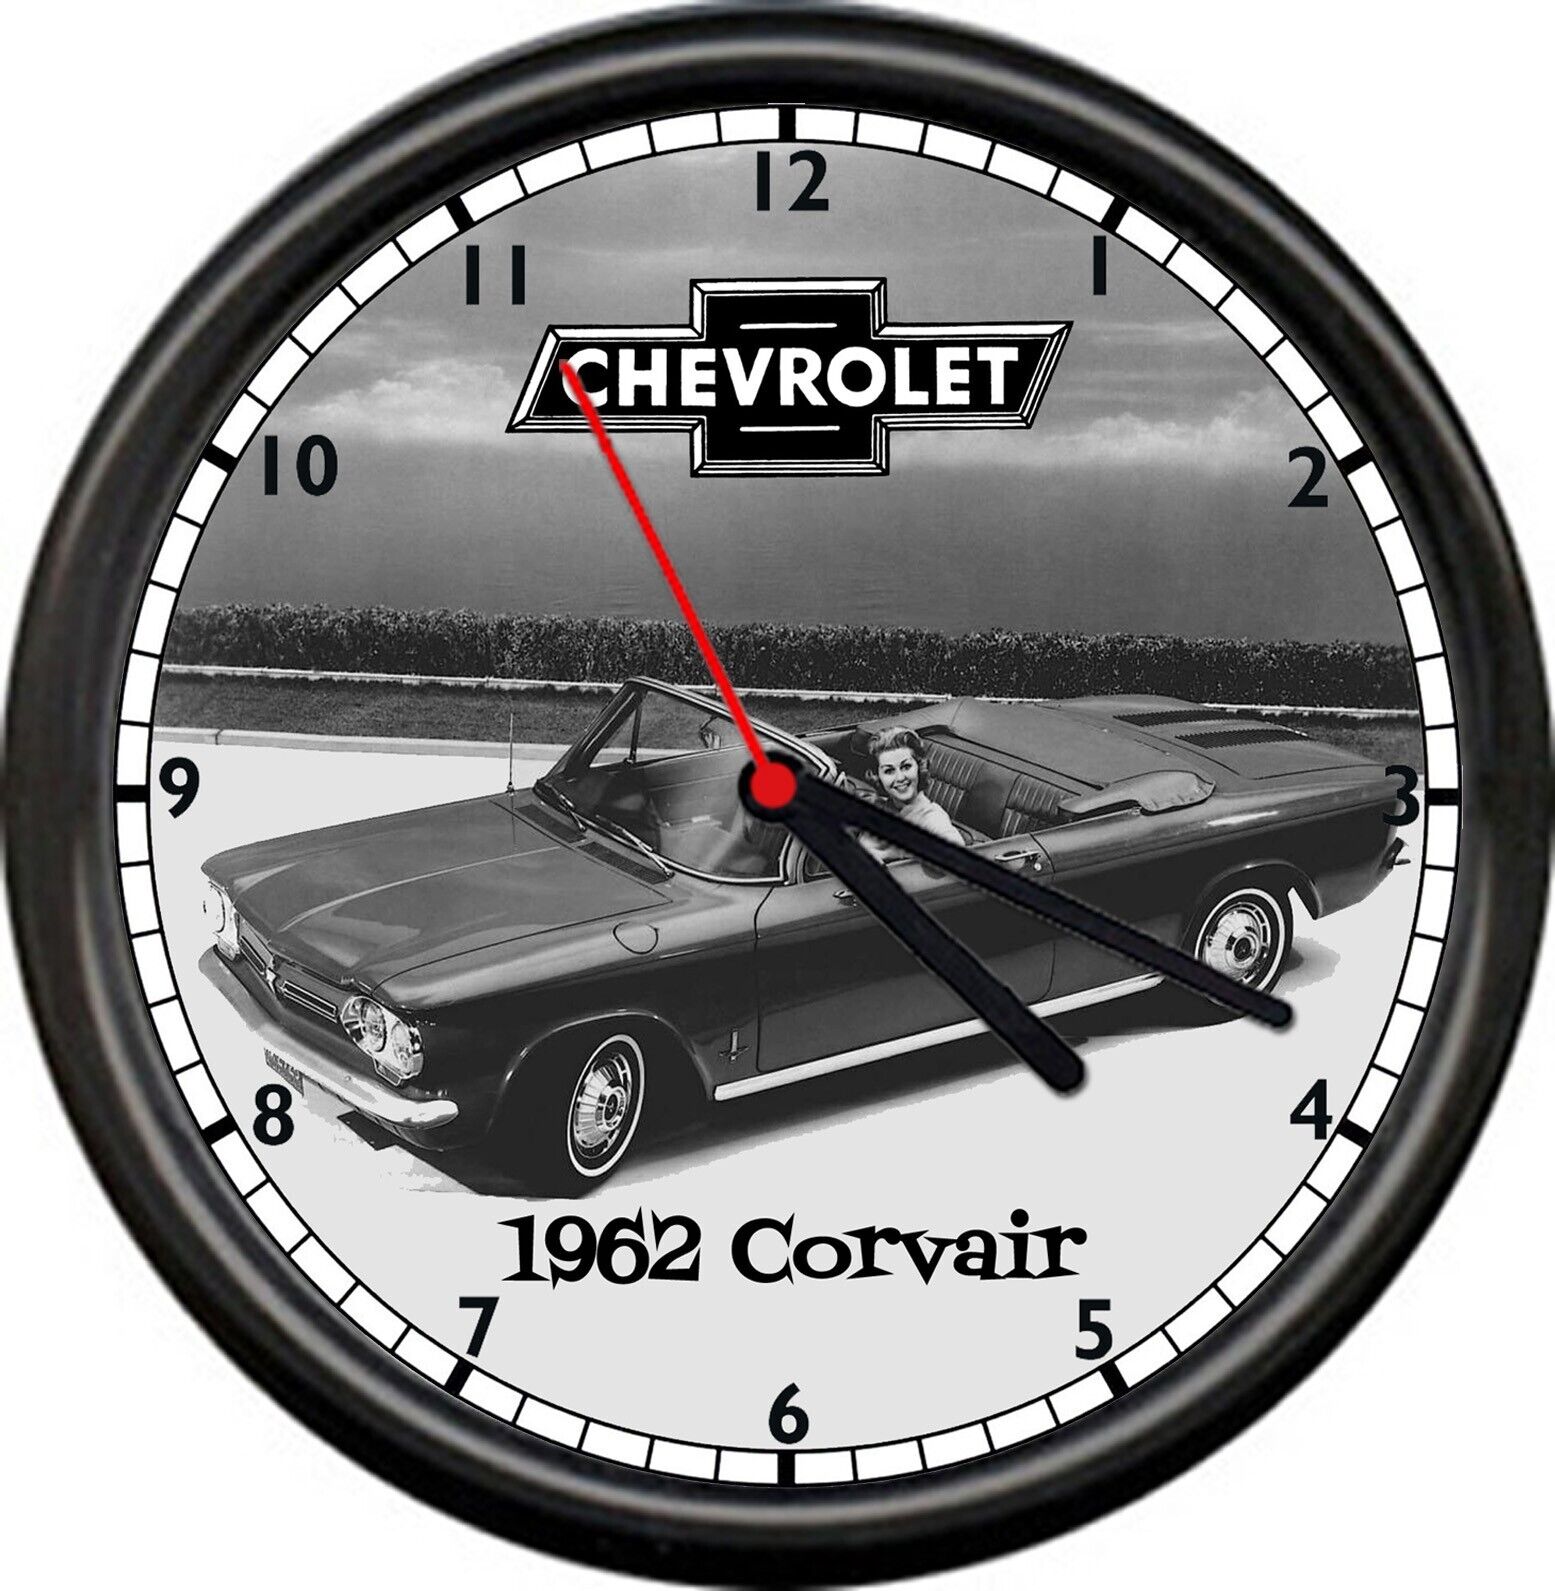 Retro Vintage Image 1962 Chevy Chevrolet Corvair Ad Sign Wall Clock